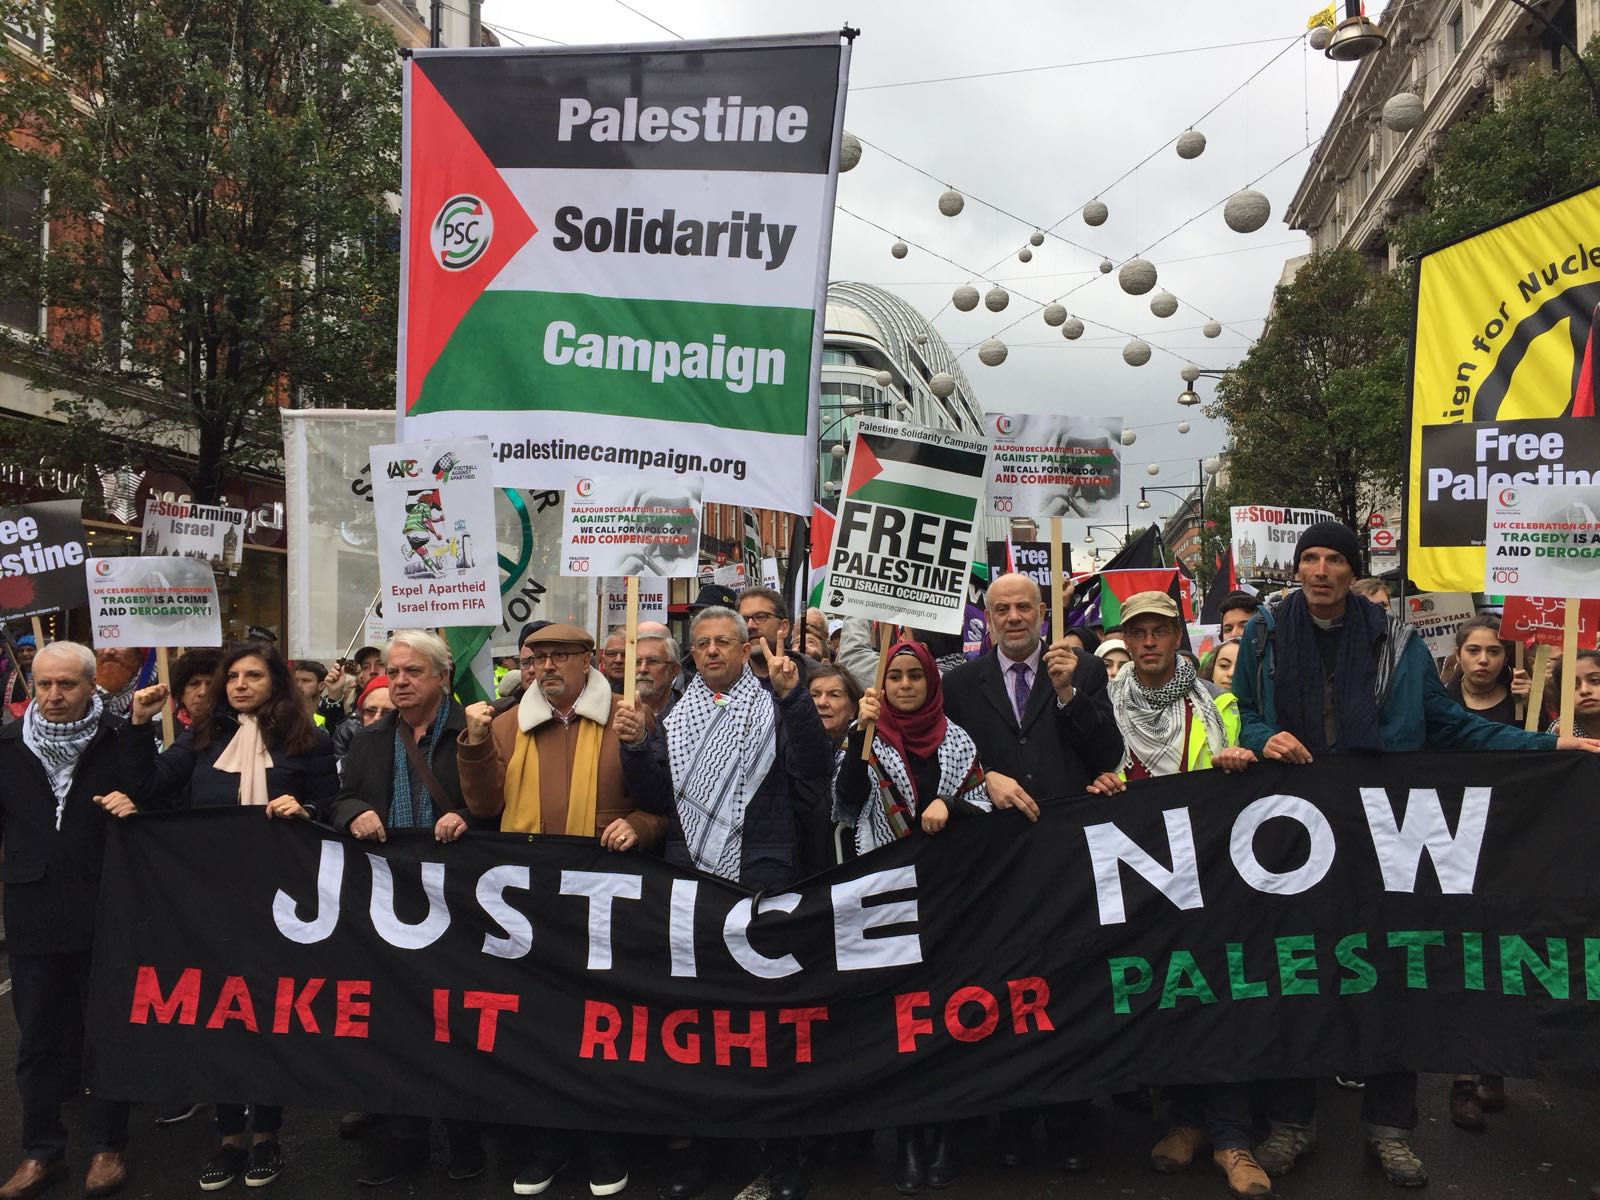 Londoners mark 100 years since Balfour Declaration in a protest to recognise the on-going oppression of Palestinians and calling for an apology from the British government, in London on November 4, 2017